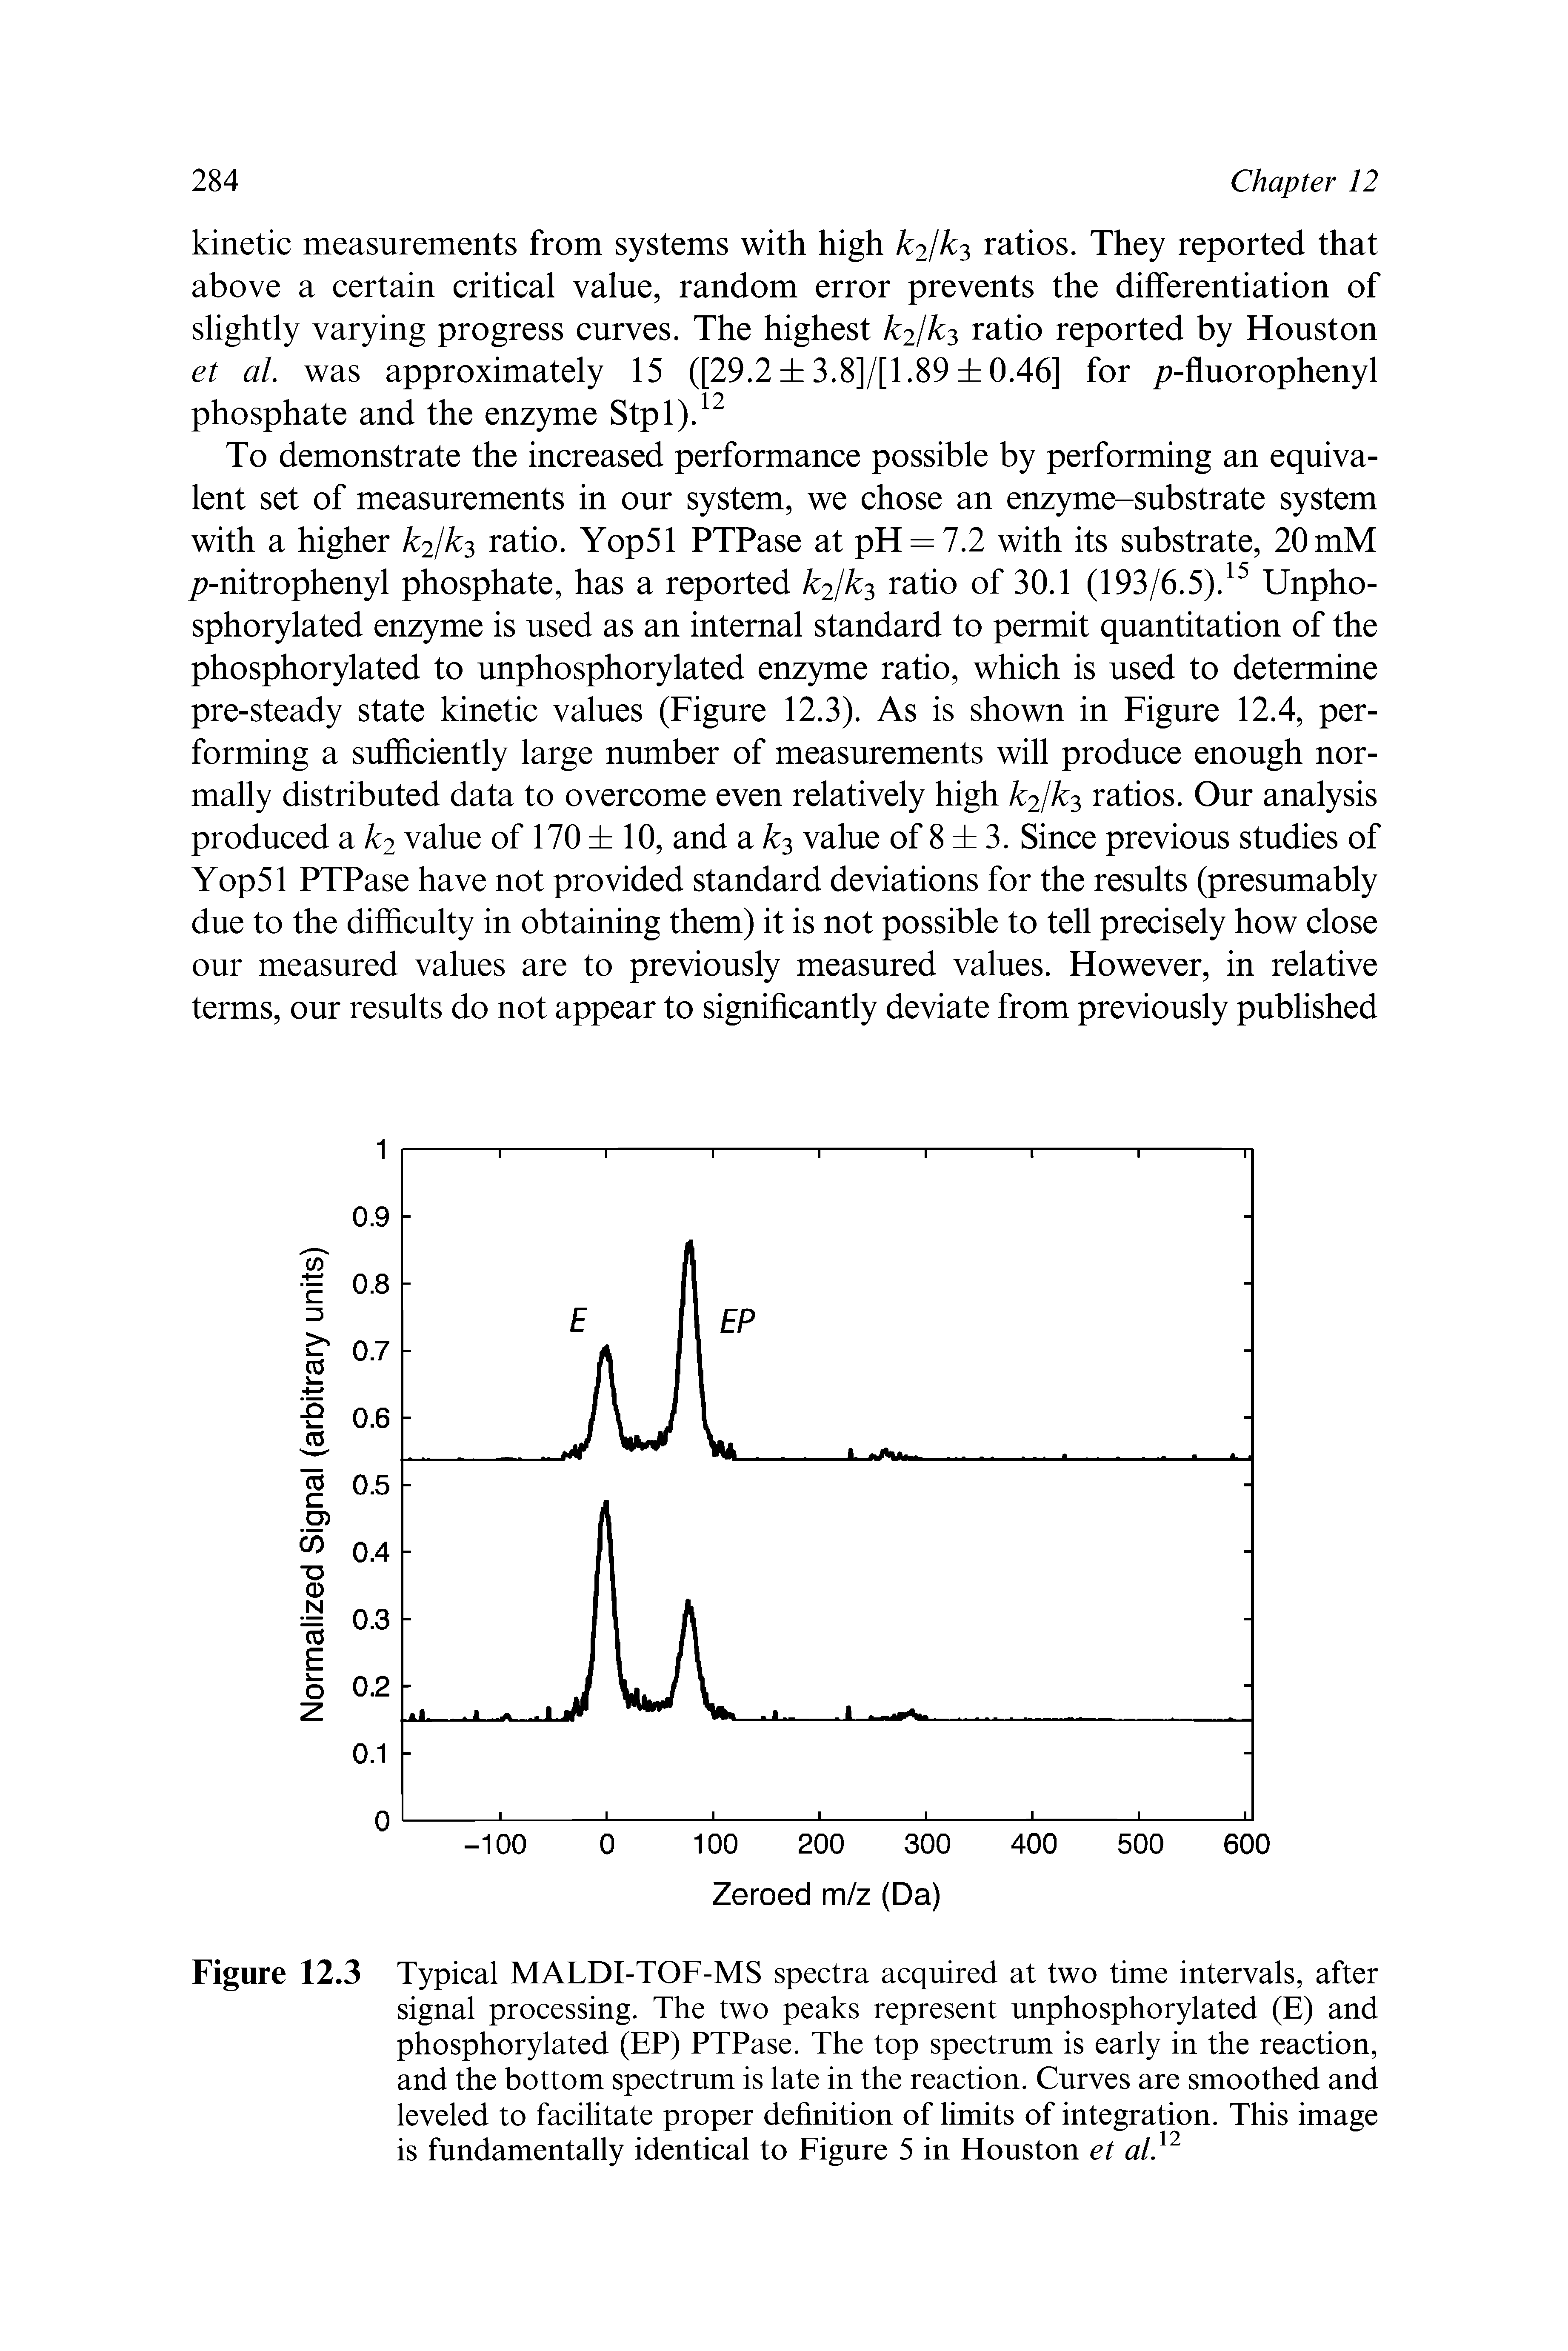 Figure 12.3 Typical MALDI-TOF-MS spectra acquired at two time intervals, after signal processing. The two peaks represent unphosphorylated (E) and phosphorylated (EP) PTPase. The top spectrum is early in the reaction, and the bottom spectrum is late in the reaction. Curves are smoothed and leveled to facilitate proper definition of limits of integration. This image is fundamentally identical to Figure 5 in Houston et al 2...